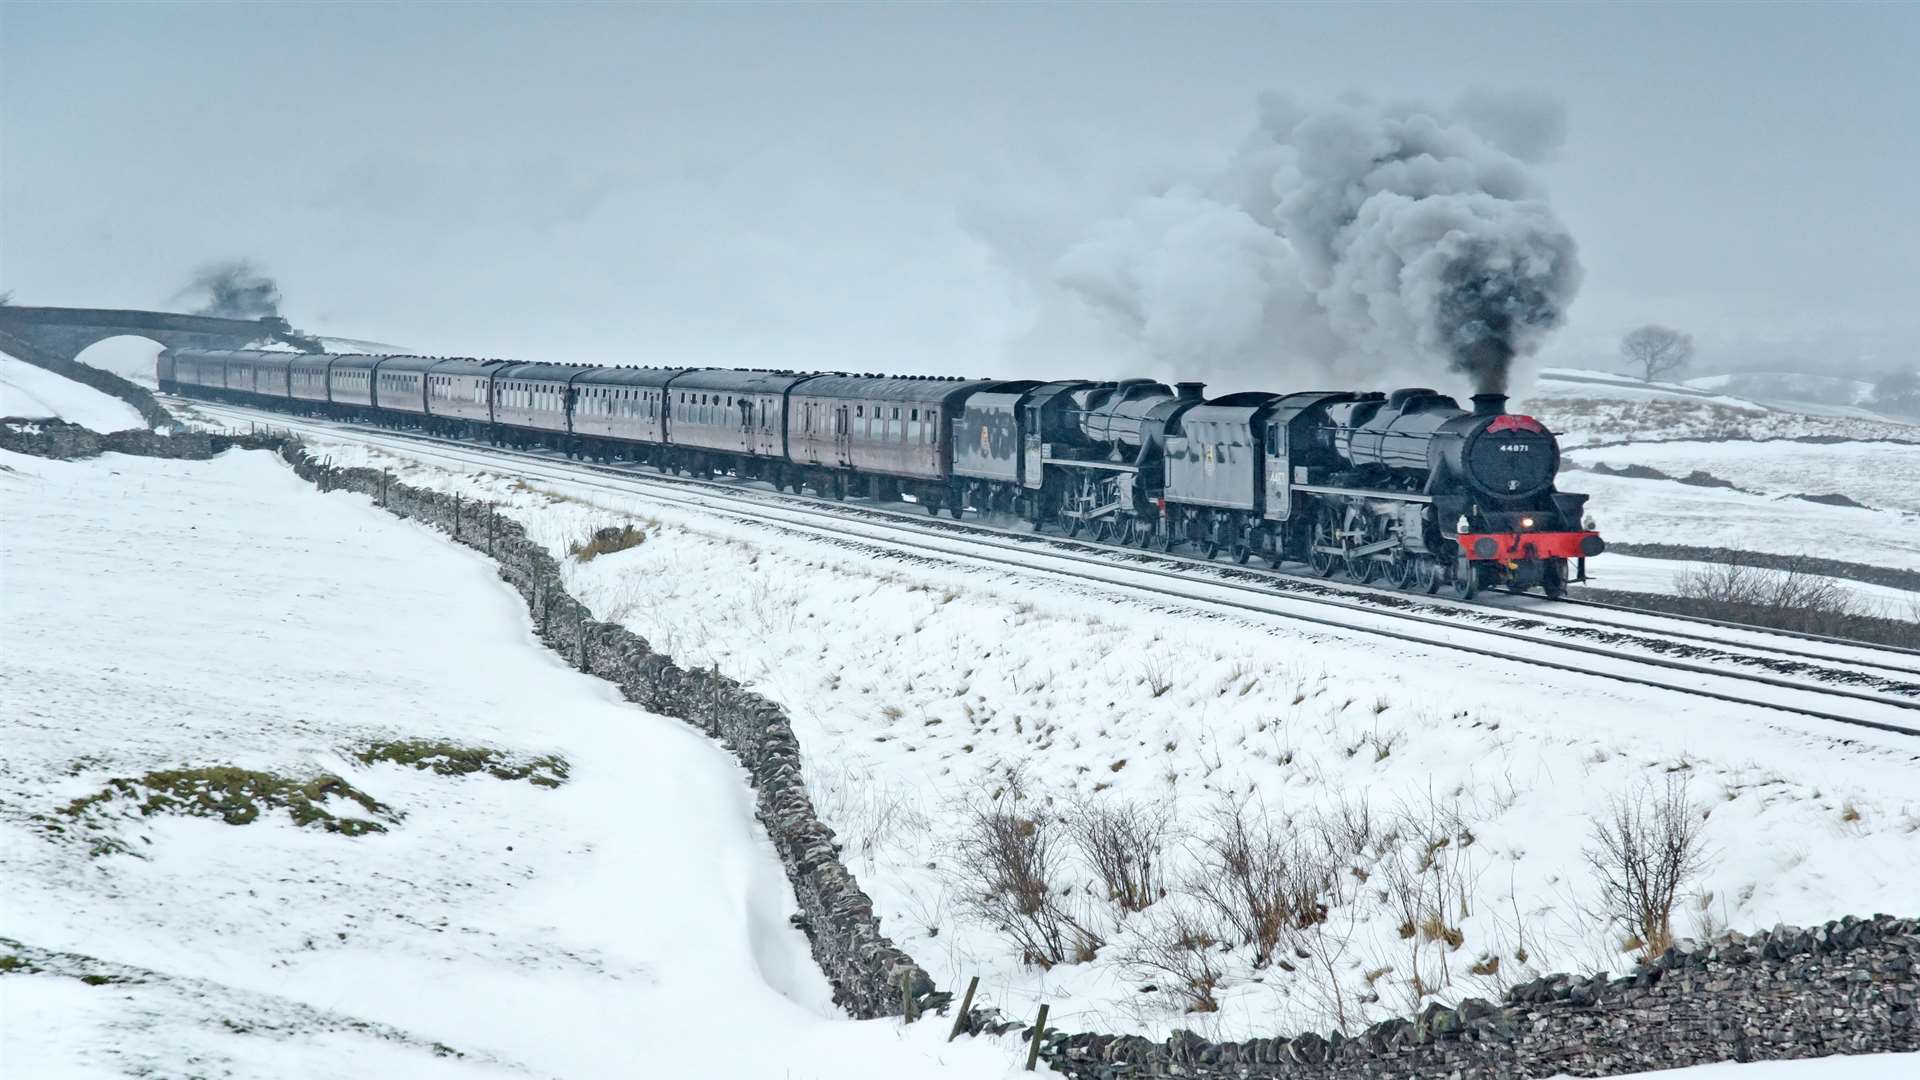 The train will be hauled by two ‘Black Five’ steam locomotives